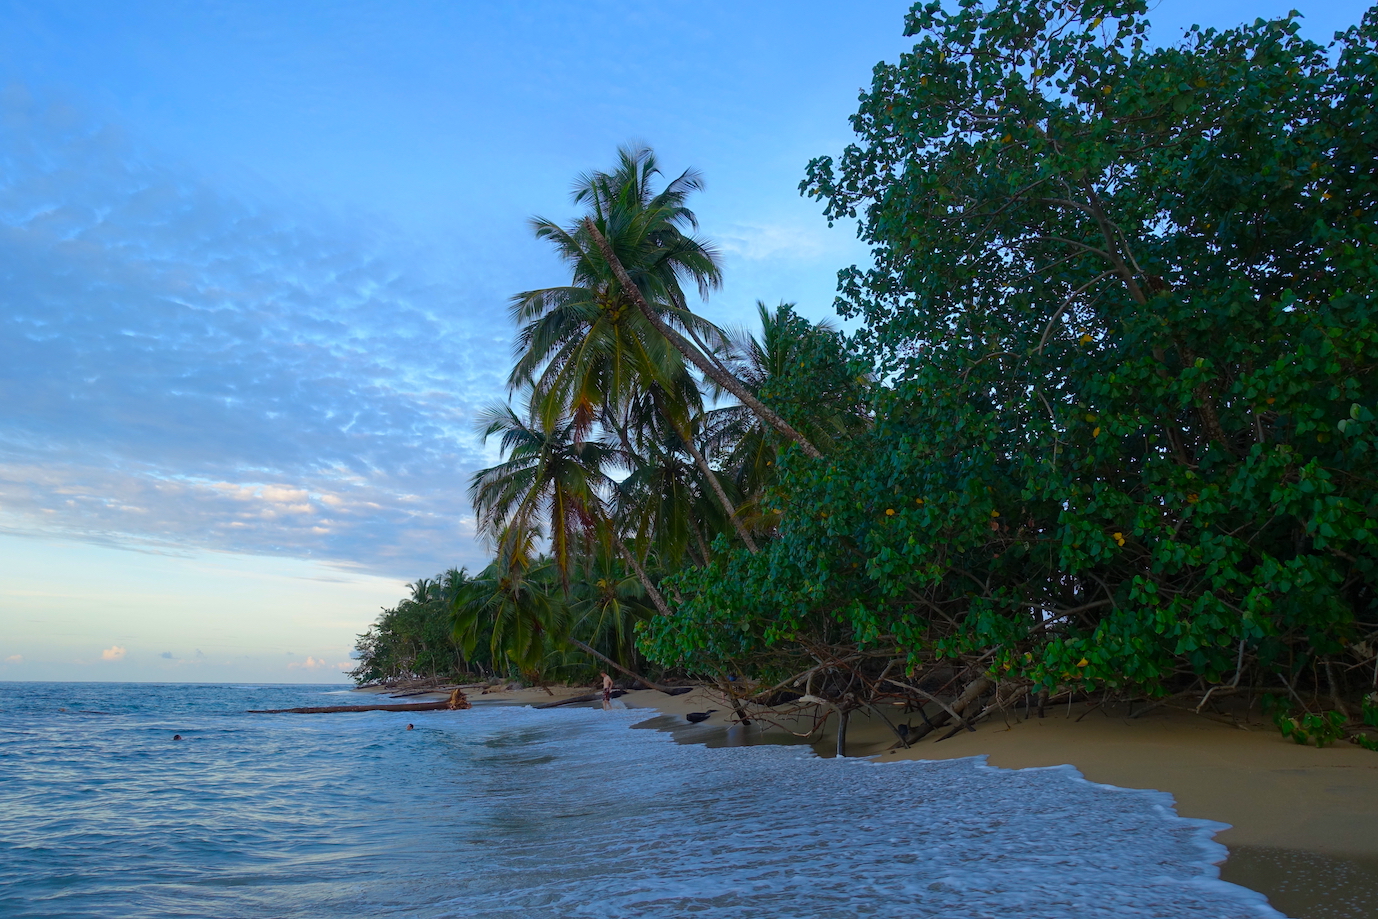 A view of Playa Grande in Costa Rica at sunset time. Several trees very close to the sea.